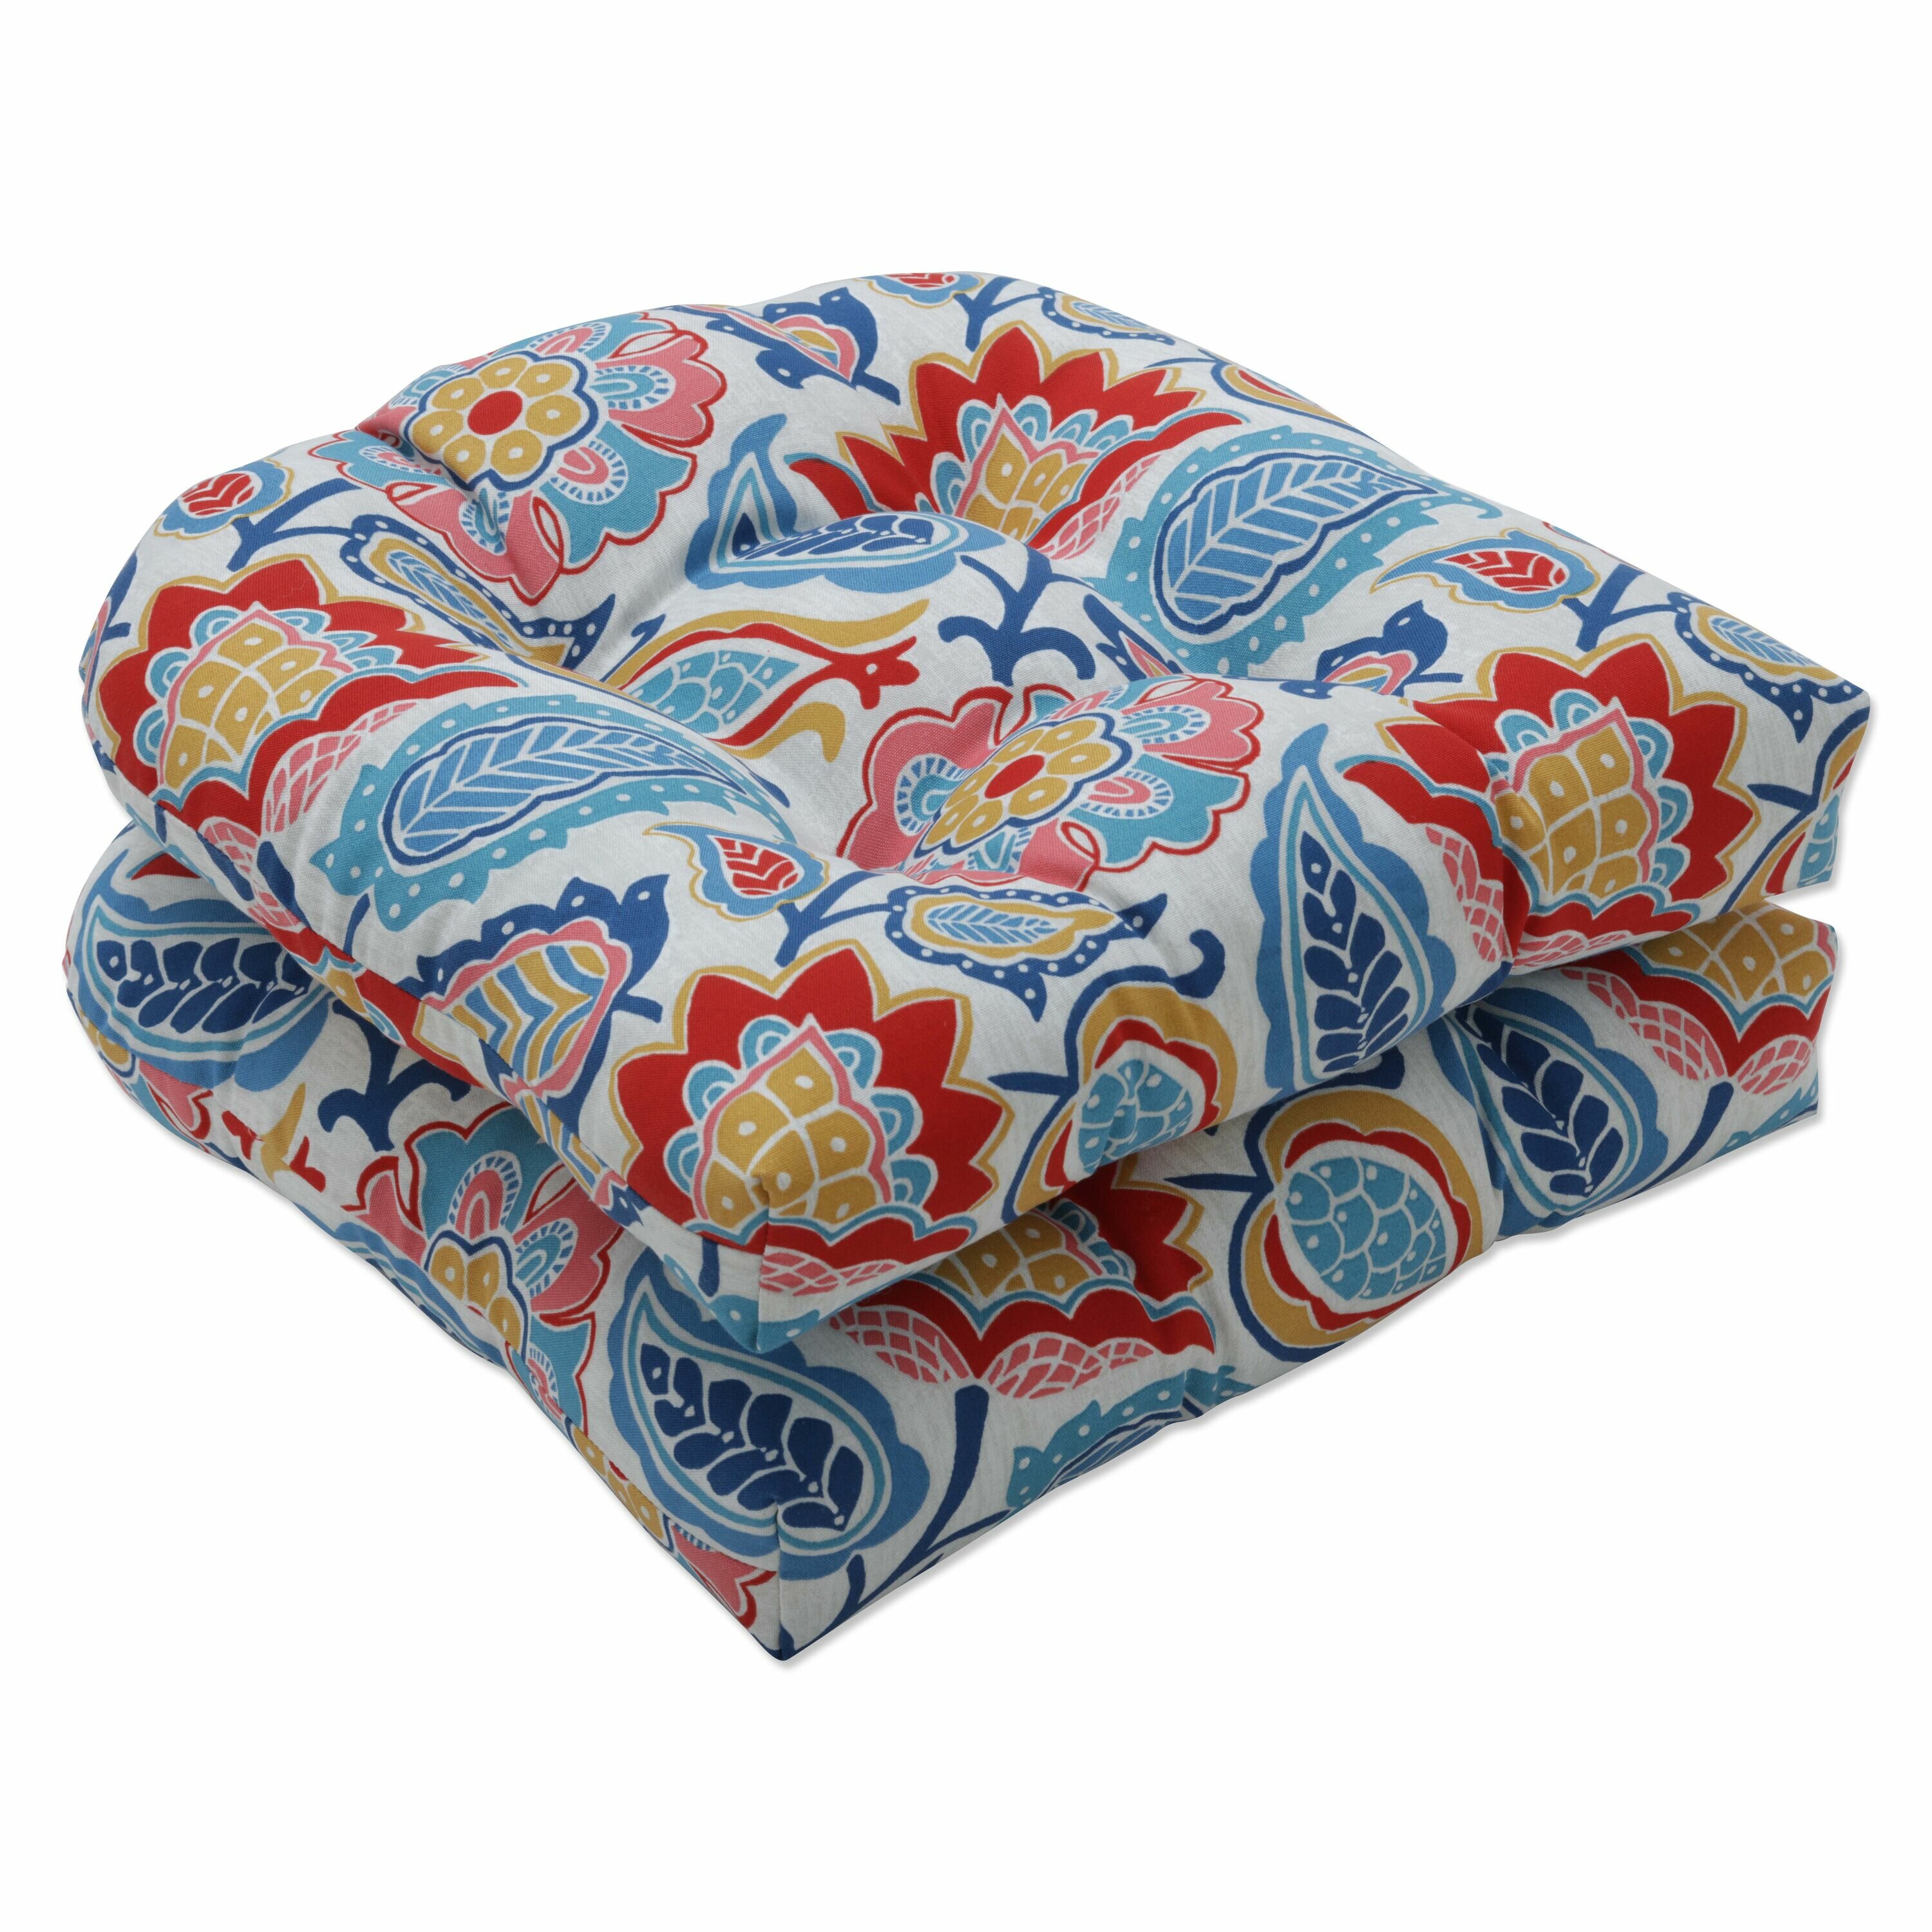 Luxury Morocco Terracotta Patchwork Chenille Seat Chair Pads 1 x Seat Cushion Cushions With Piped Edging And Zipped Covers